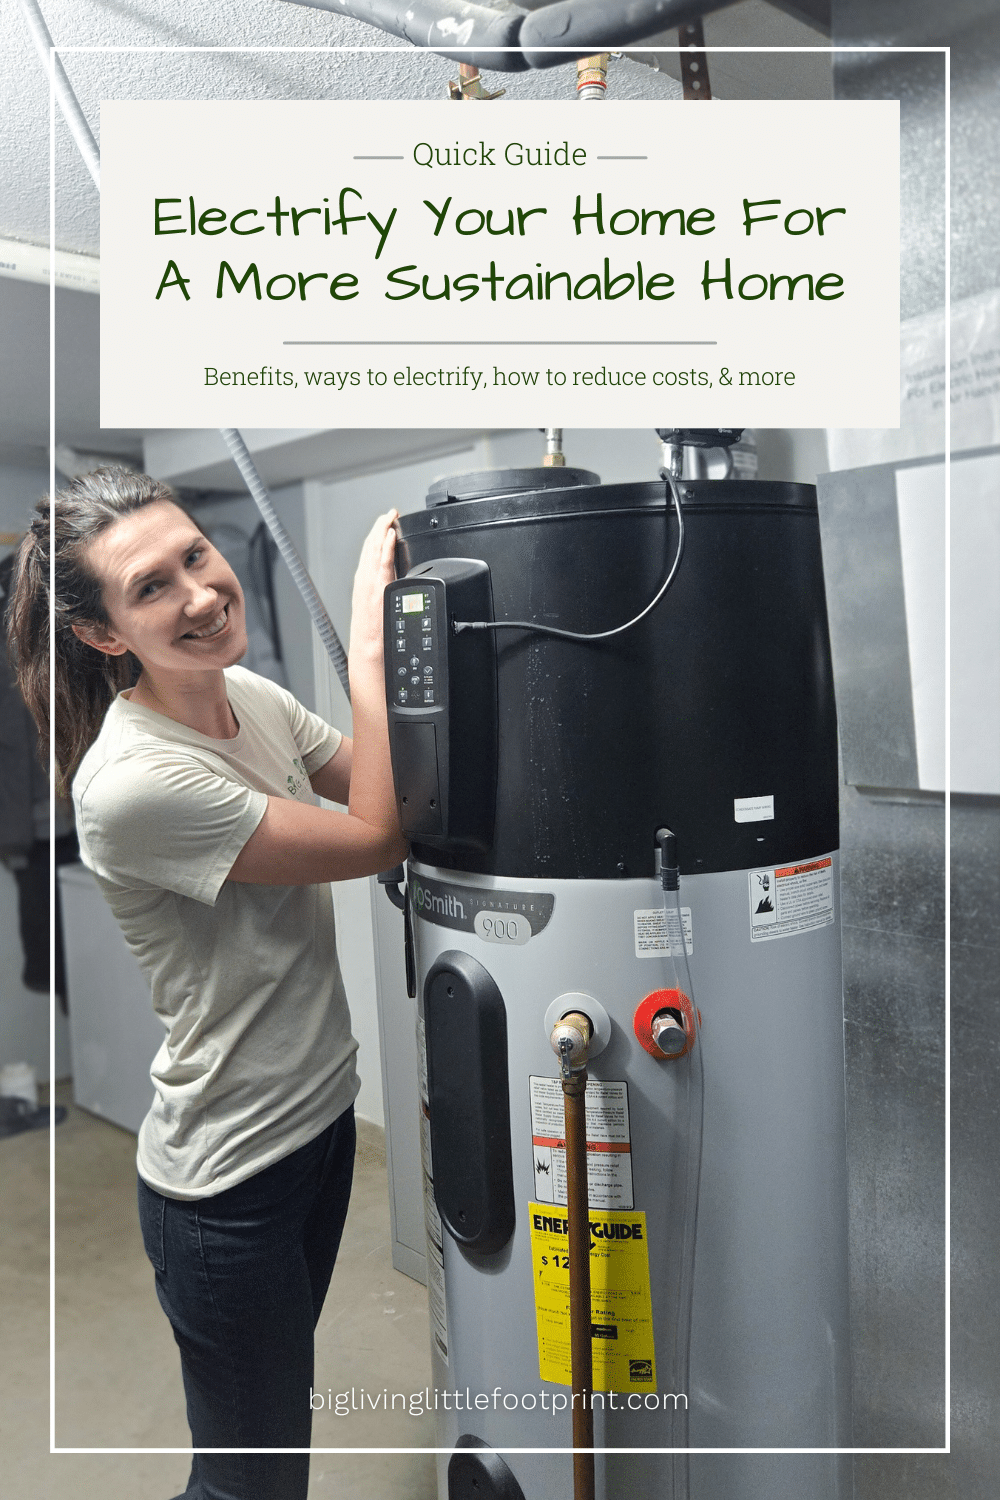 Electrify Your Home: Quick Guide For A More Sustainable Home